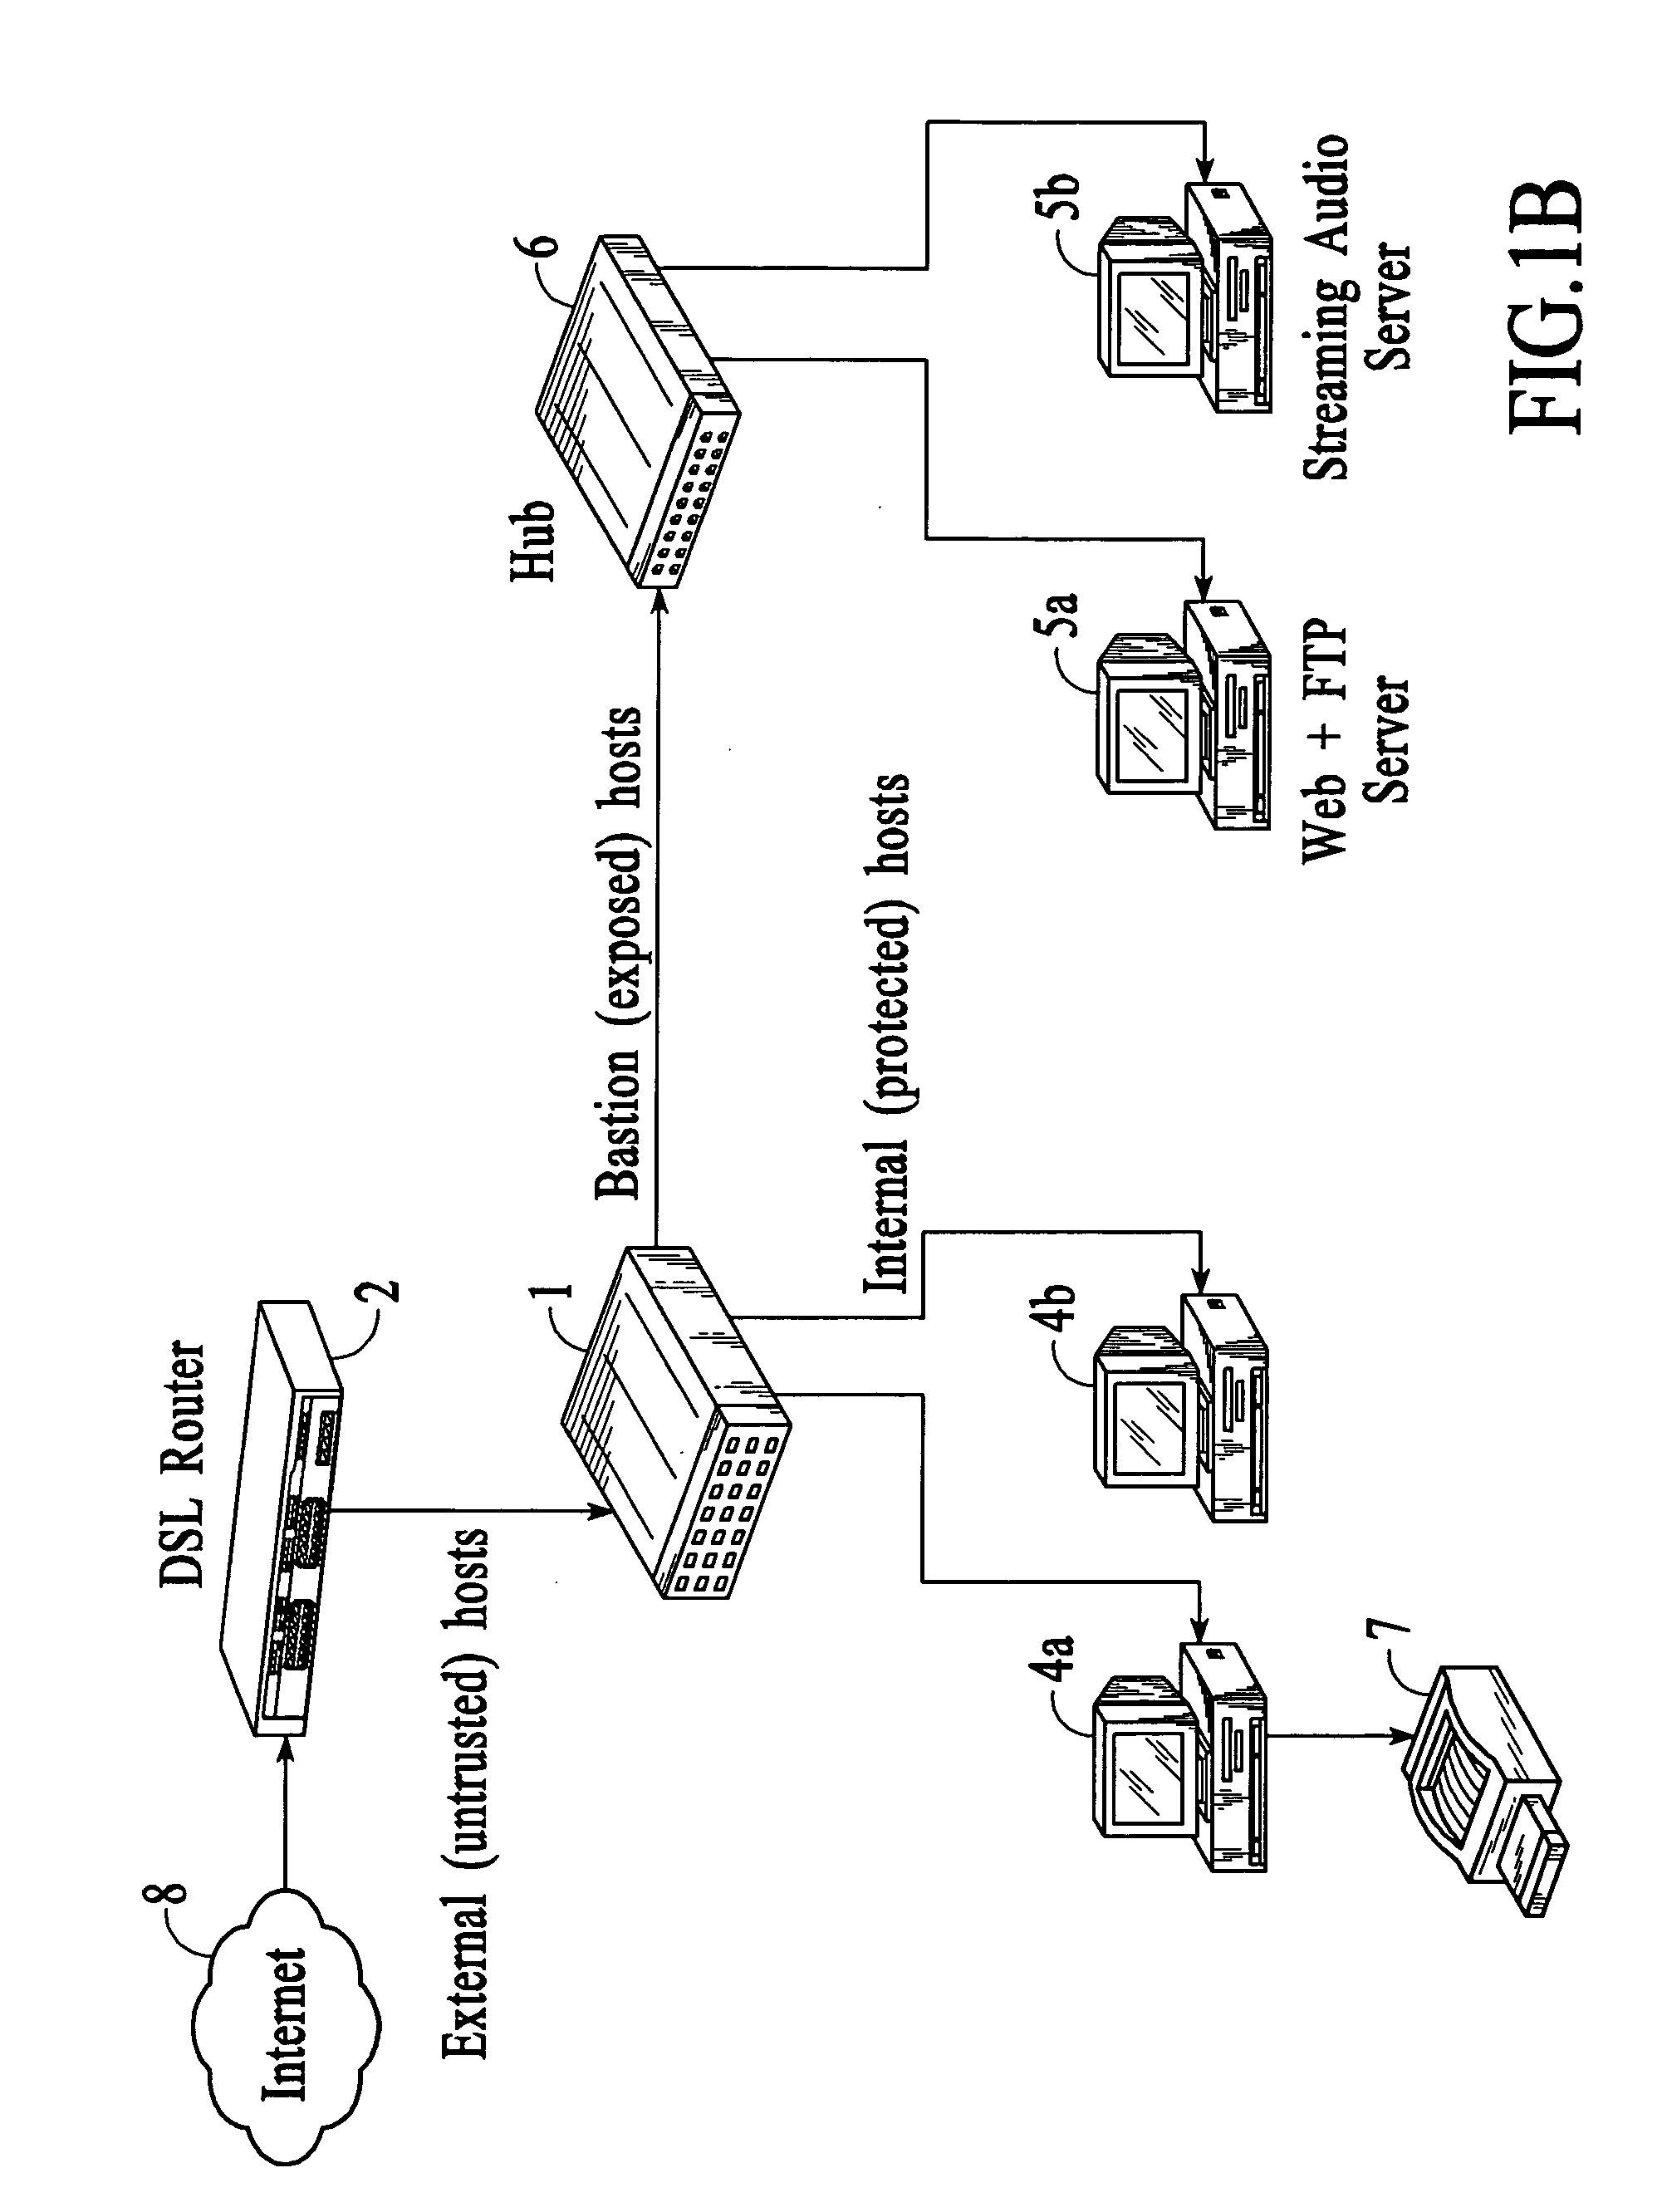 Methods and systems using PLD-based network communication protocols